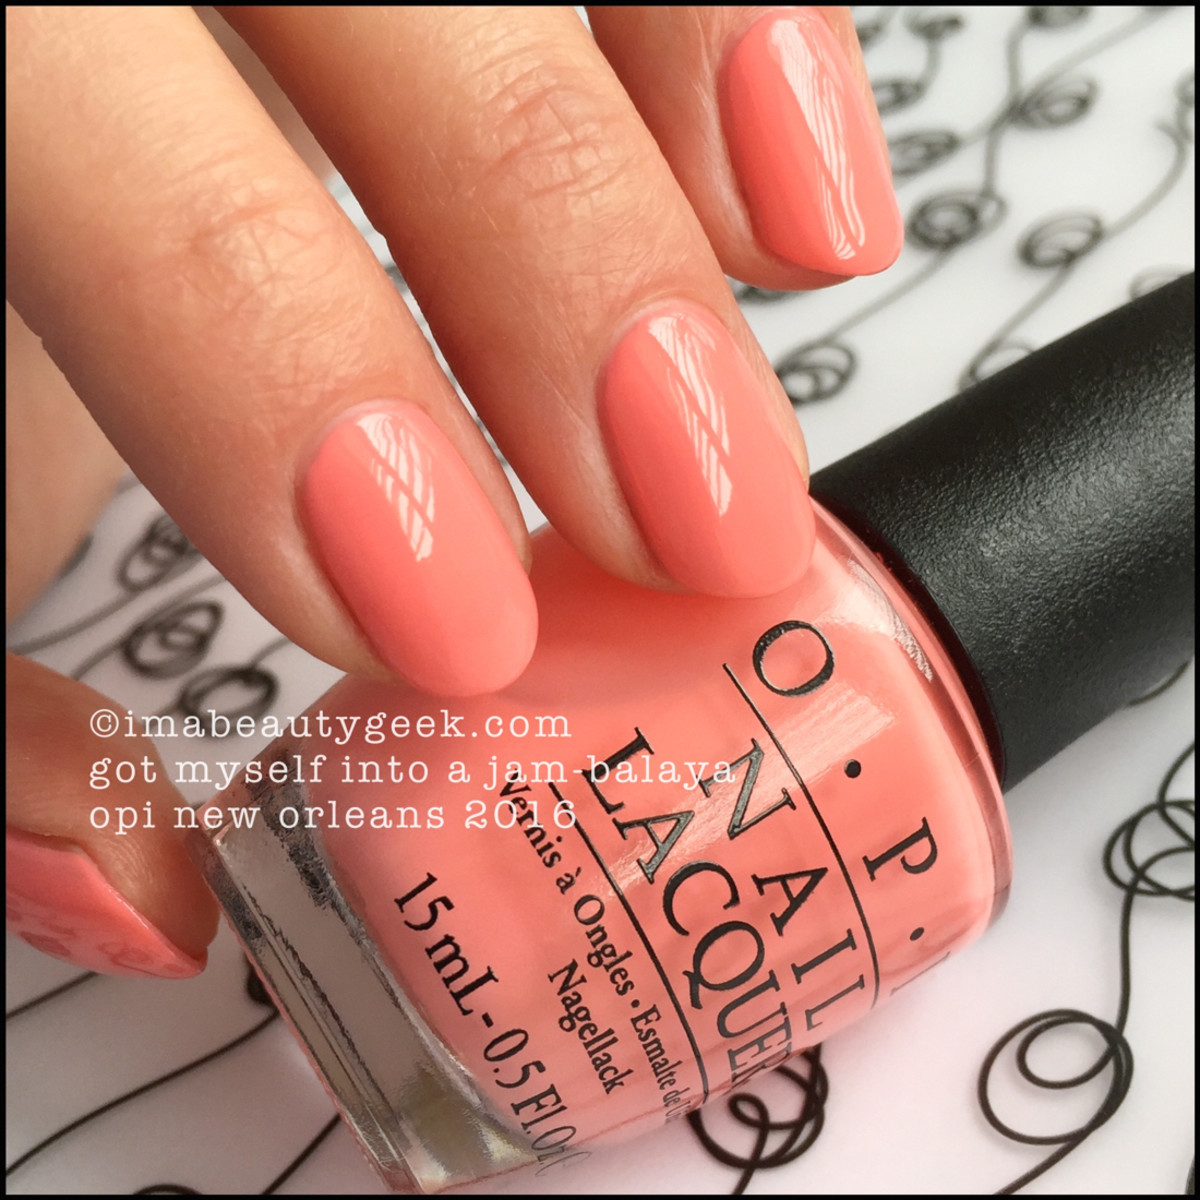 OPI Got Myself into a Jambalaya_OPI New Orleans Swatches Review 2016